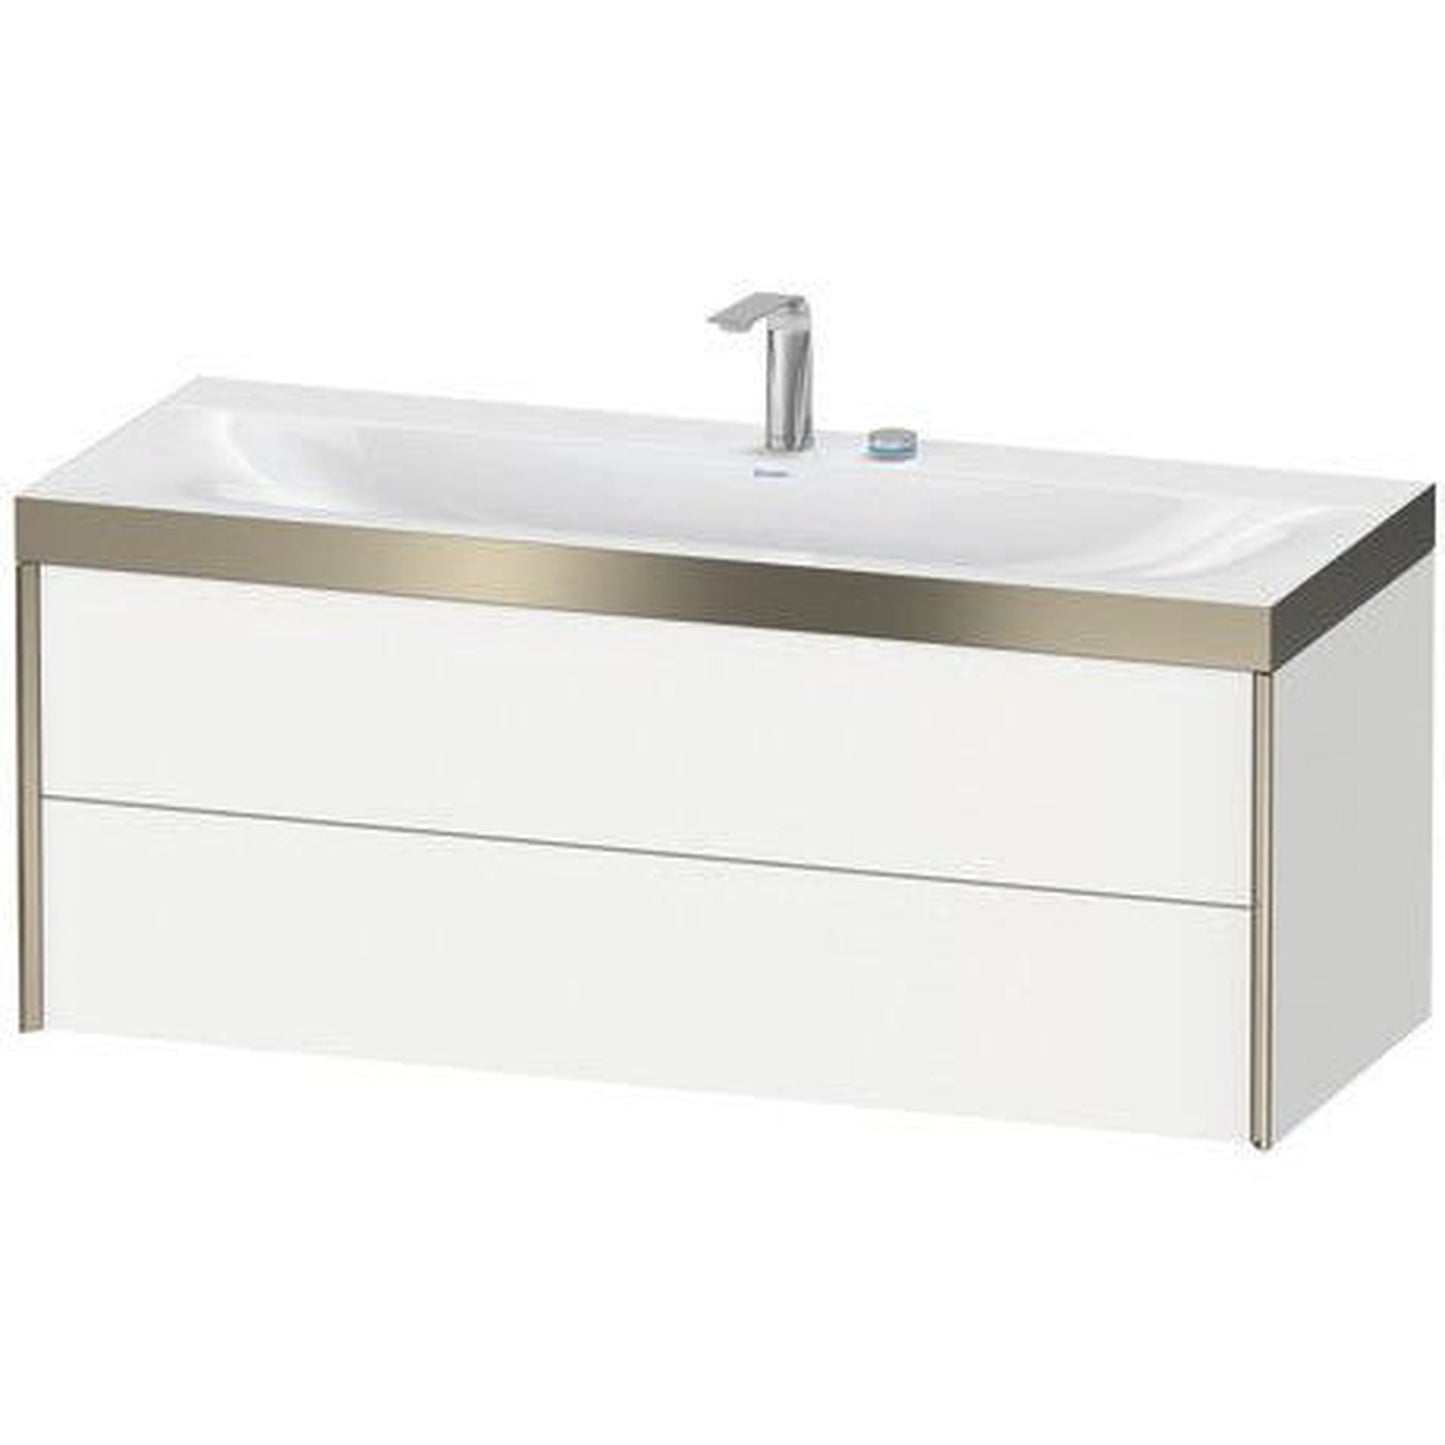 Duravit Xviu 47" x 20" x 19" Two Drawer C-Bonded Wall-Mount Vanity Kit Without Tap Hole, White (XV4617NB218C)